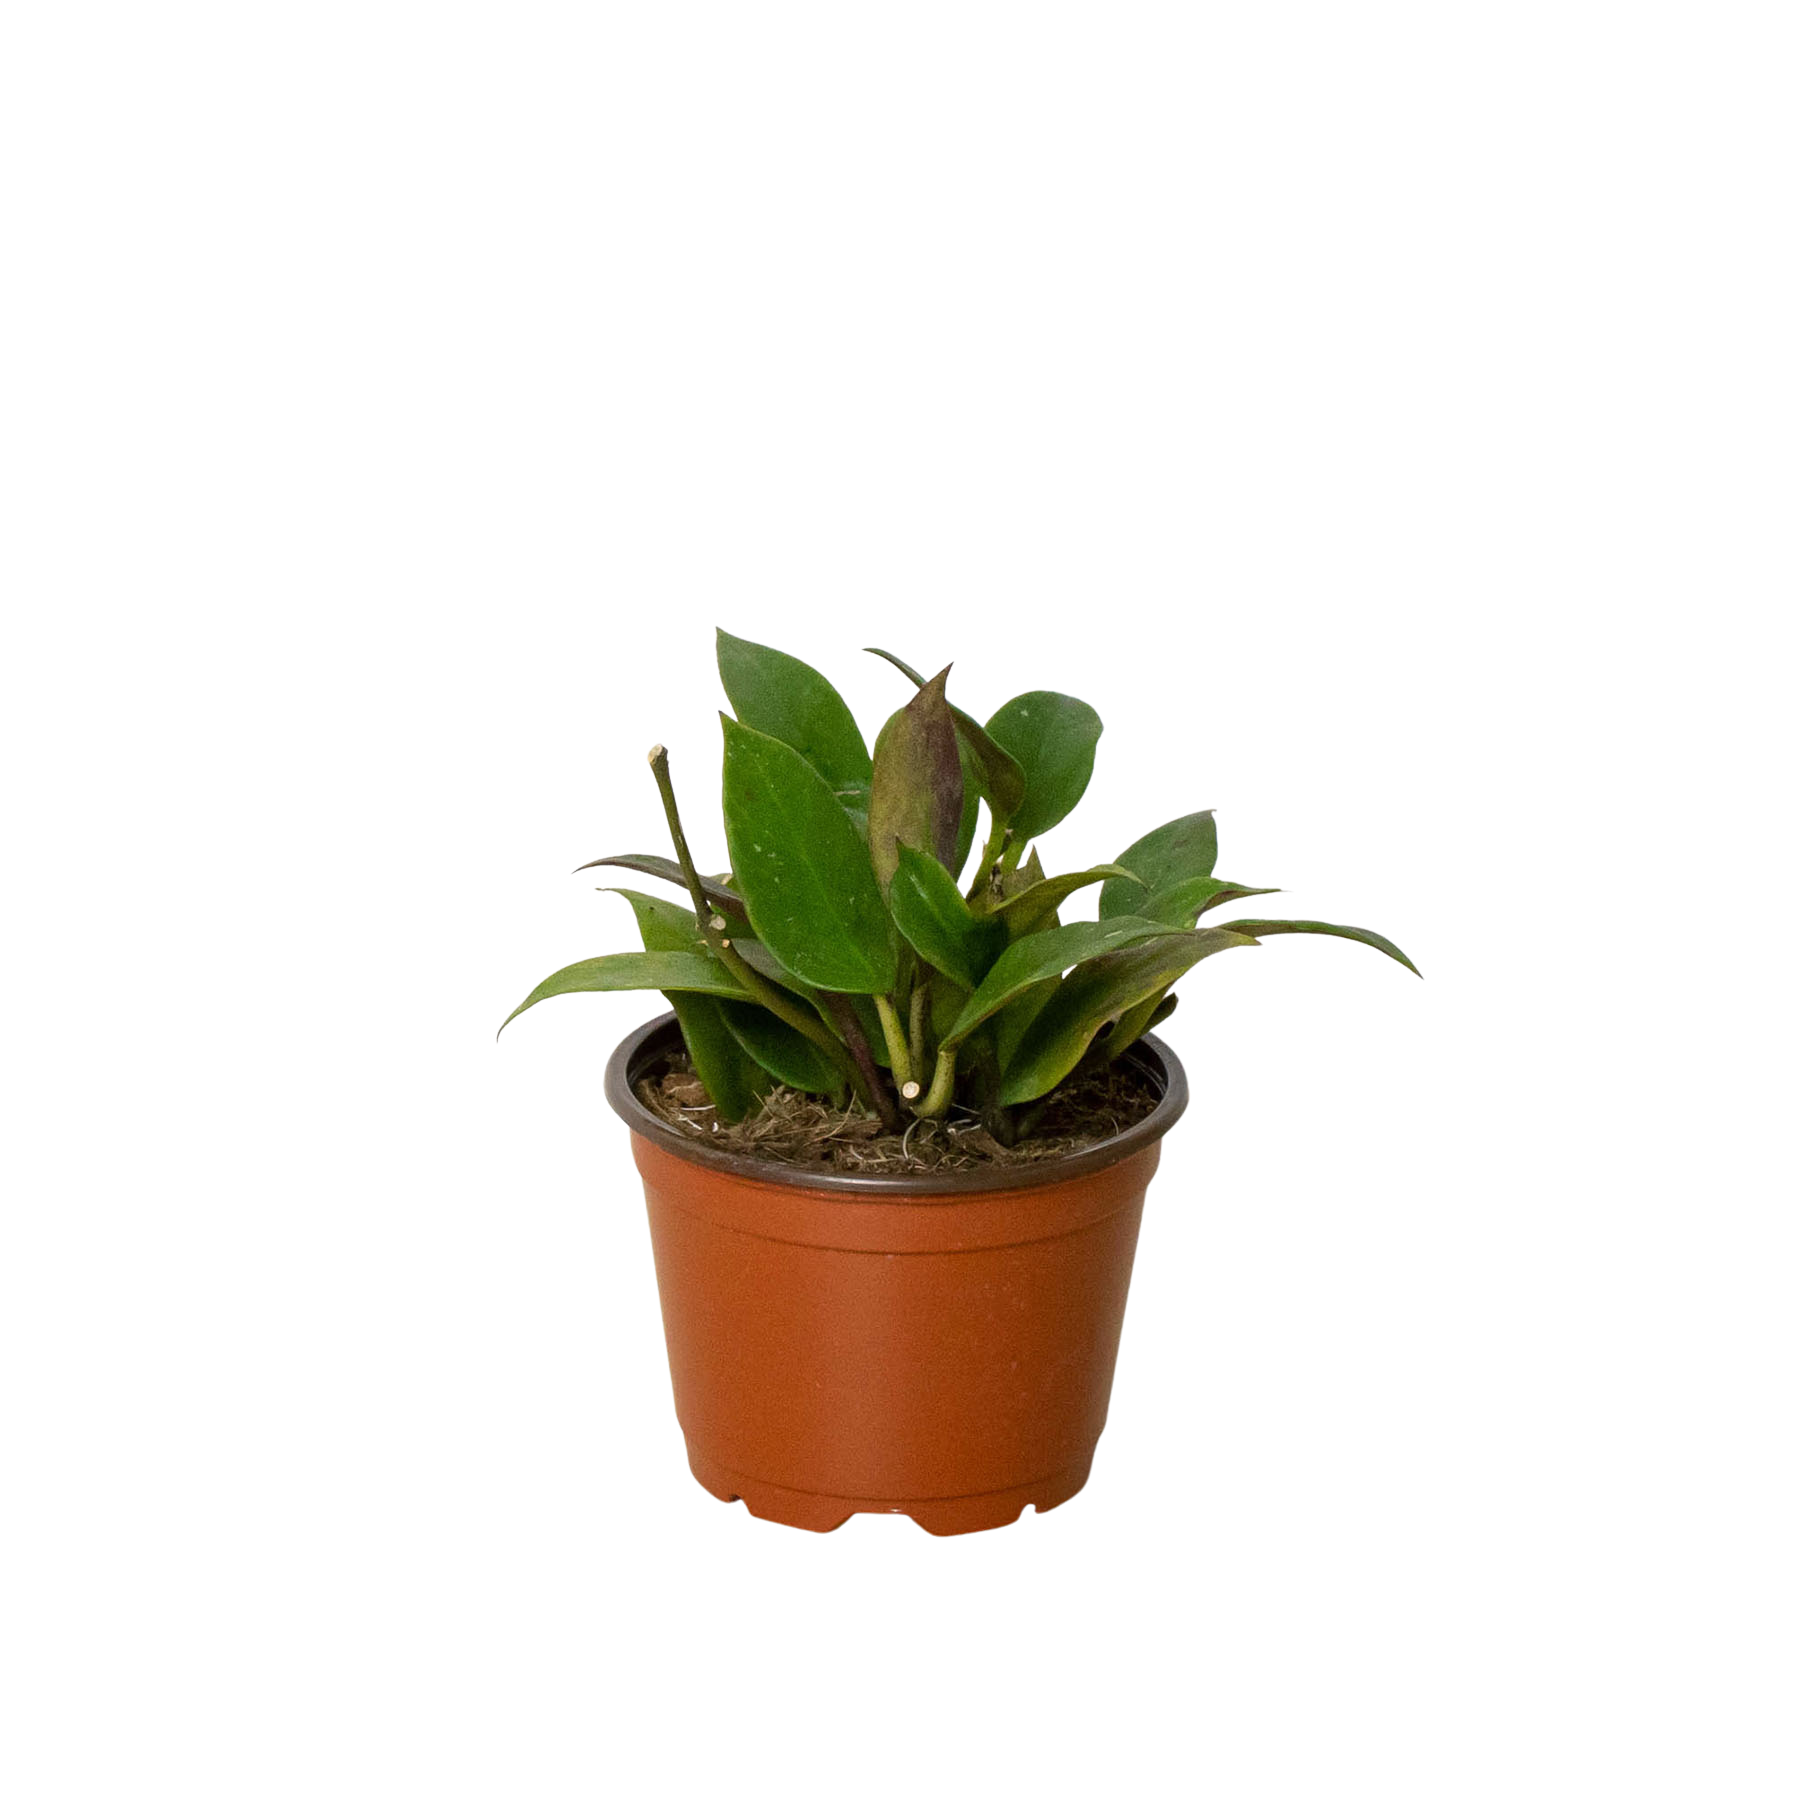 A small plant in a pot on a white background, showcased by one of the top plant nurseries near me.